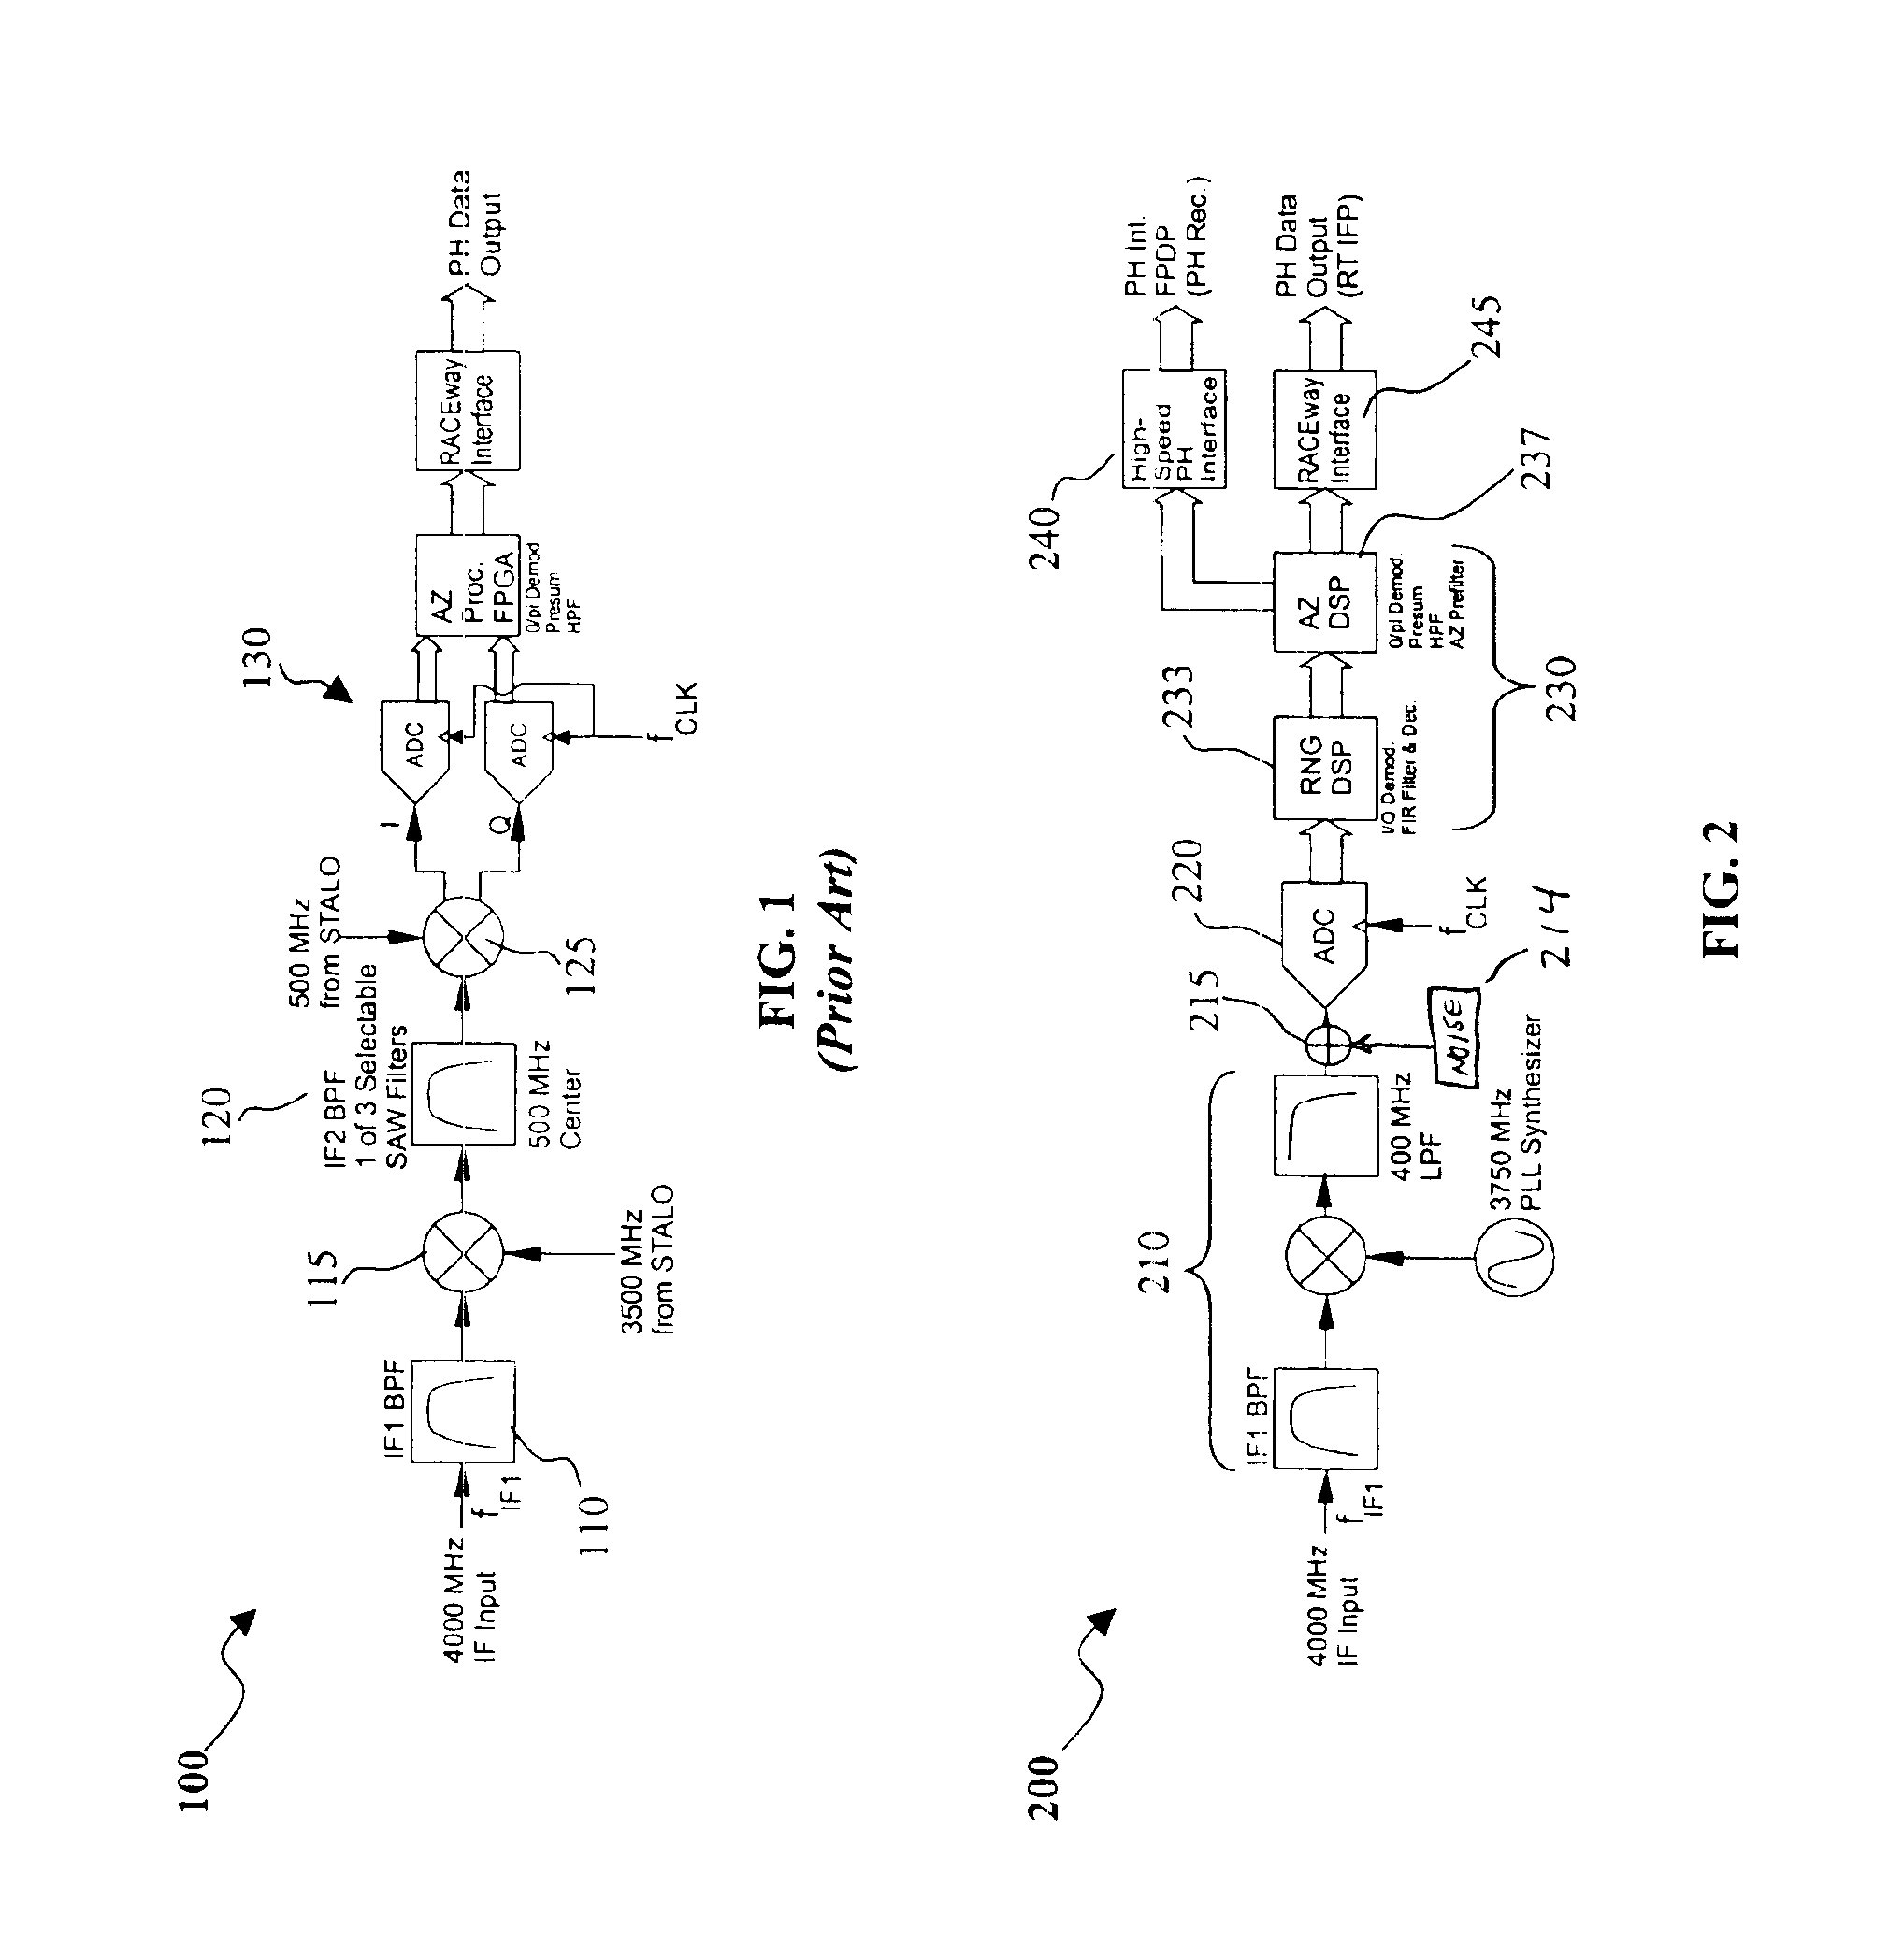 Digital intermediate frequency receiver module for use in airborne SAR applications